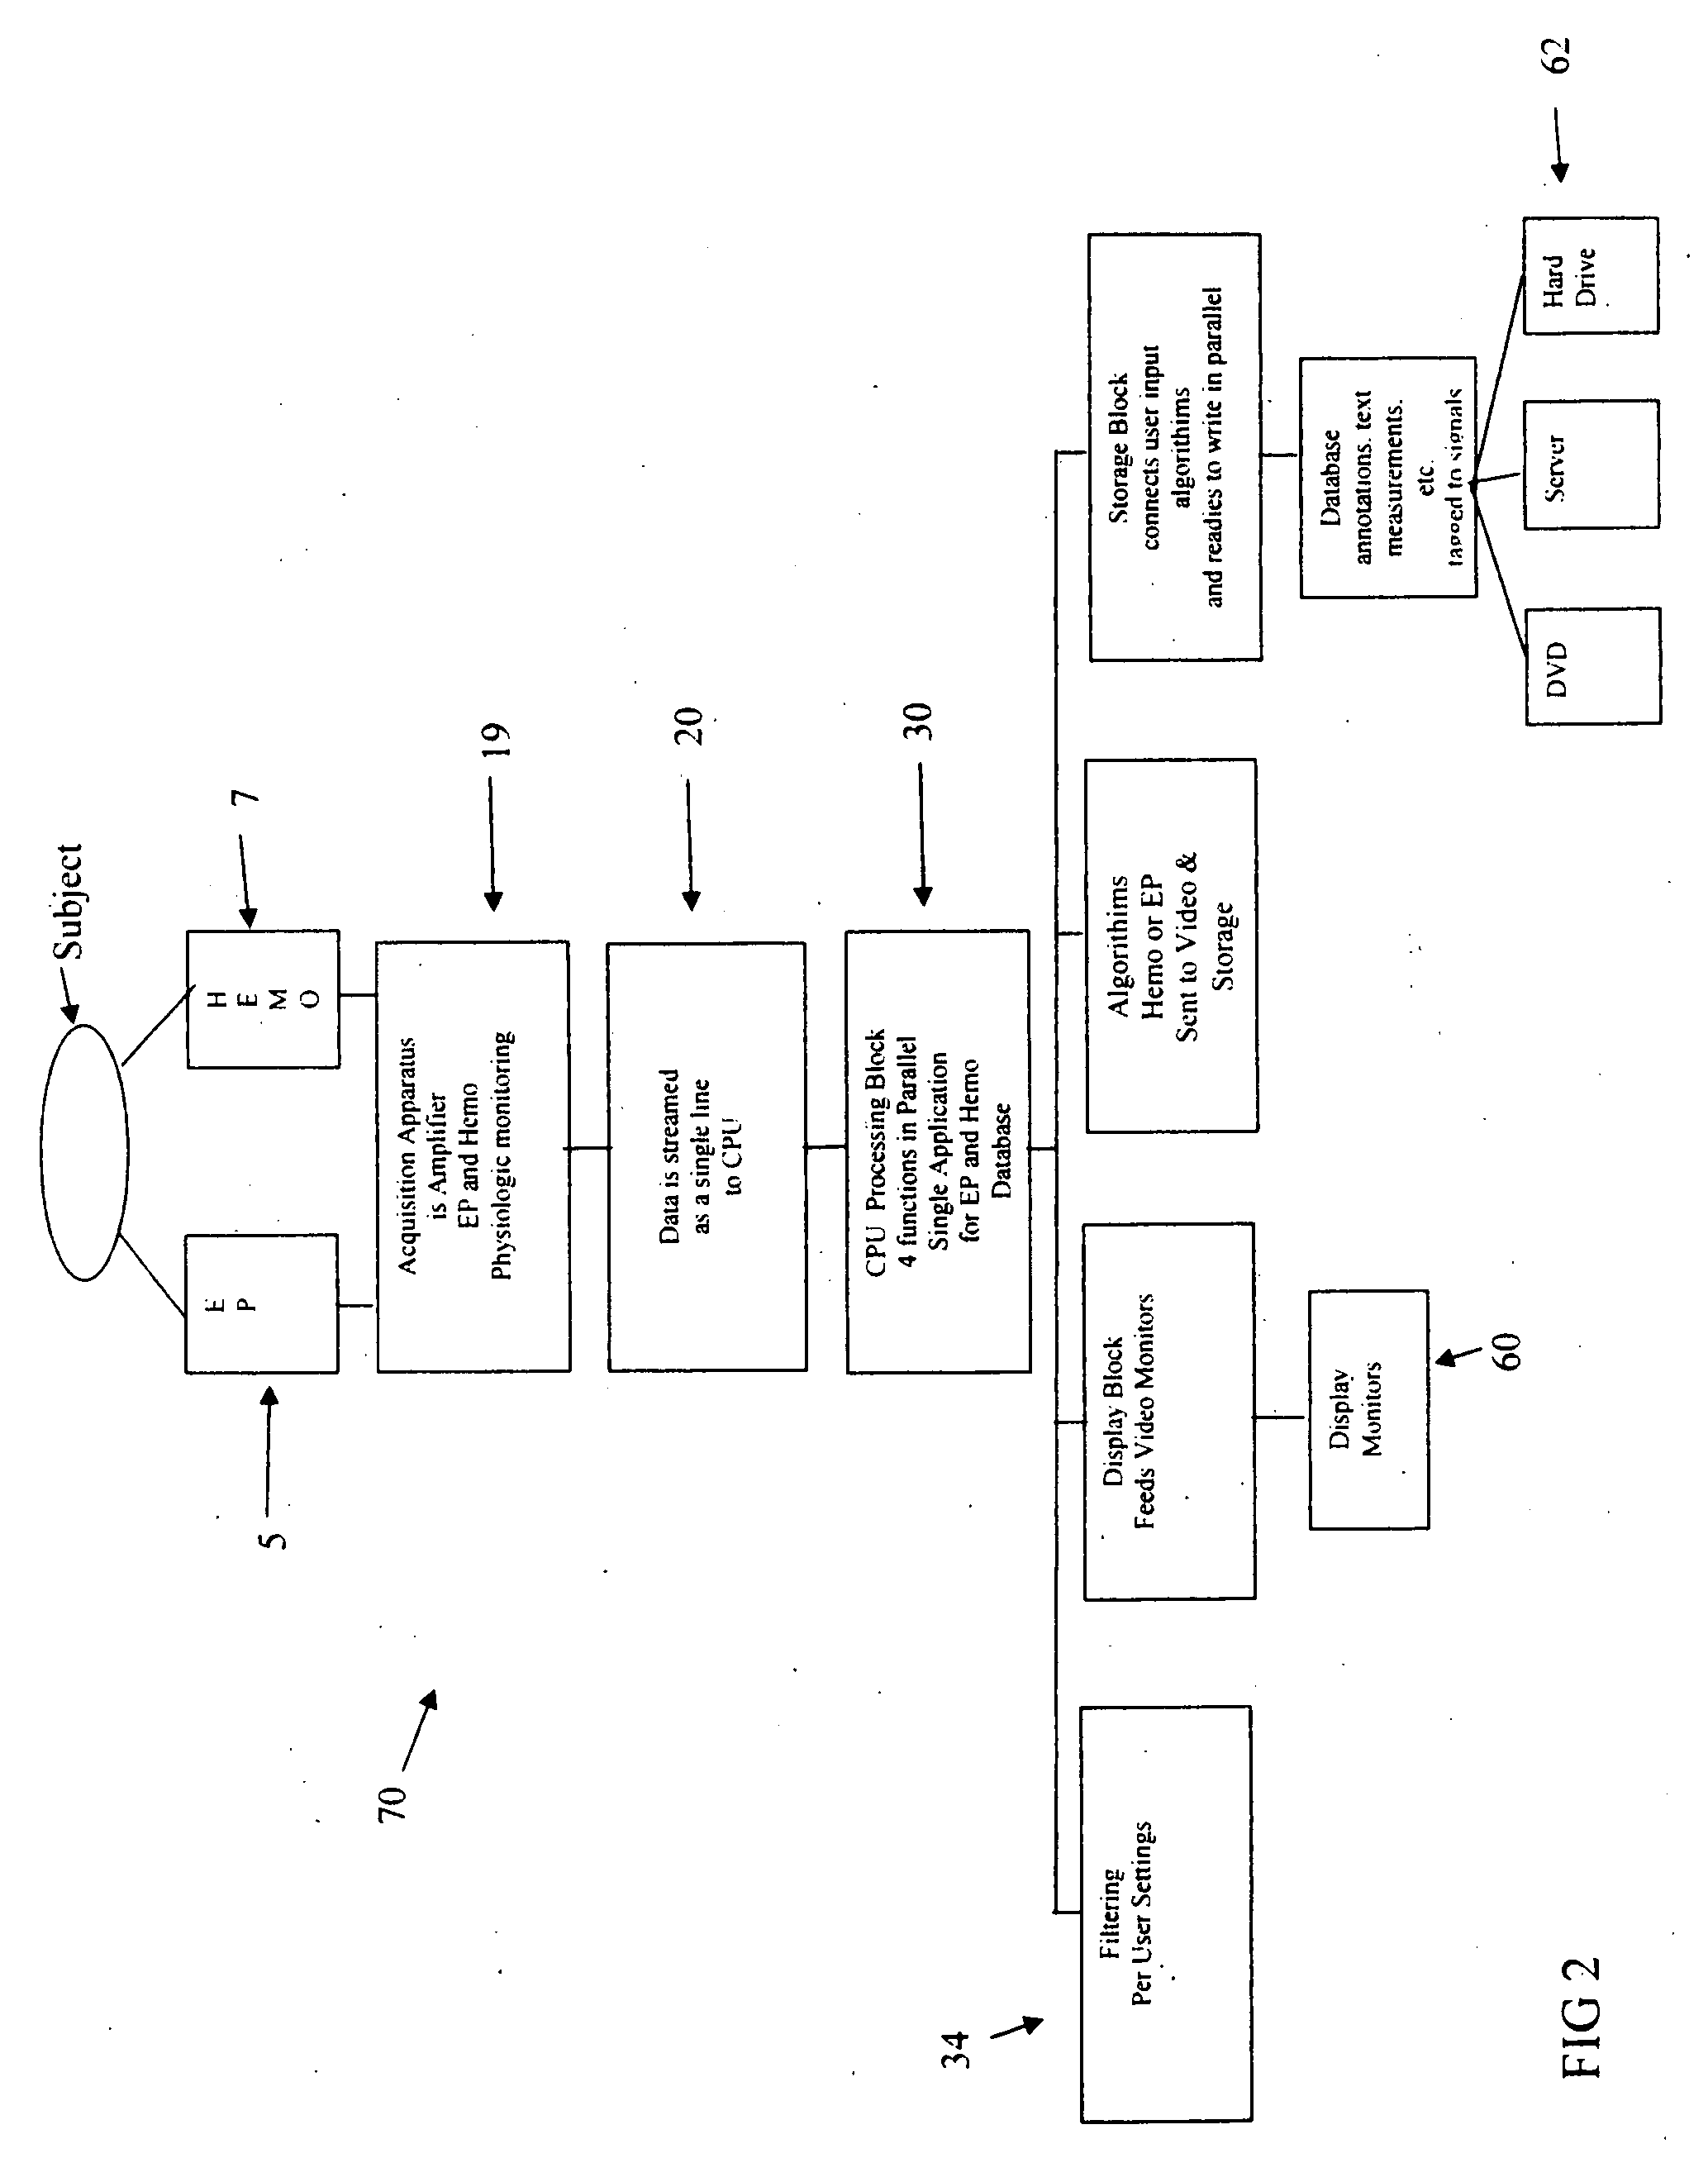 Single acquisition system for electrophysiology and hemodynamic physiological diagnostic monitoring during a clinical invasive procedure